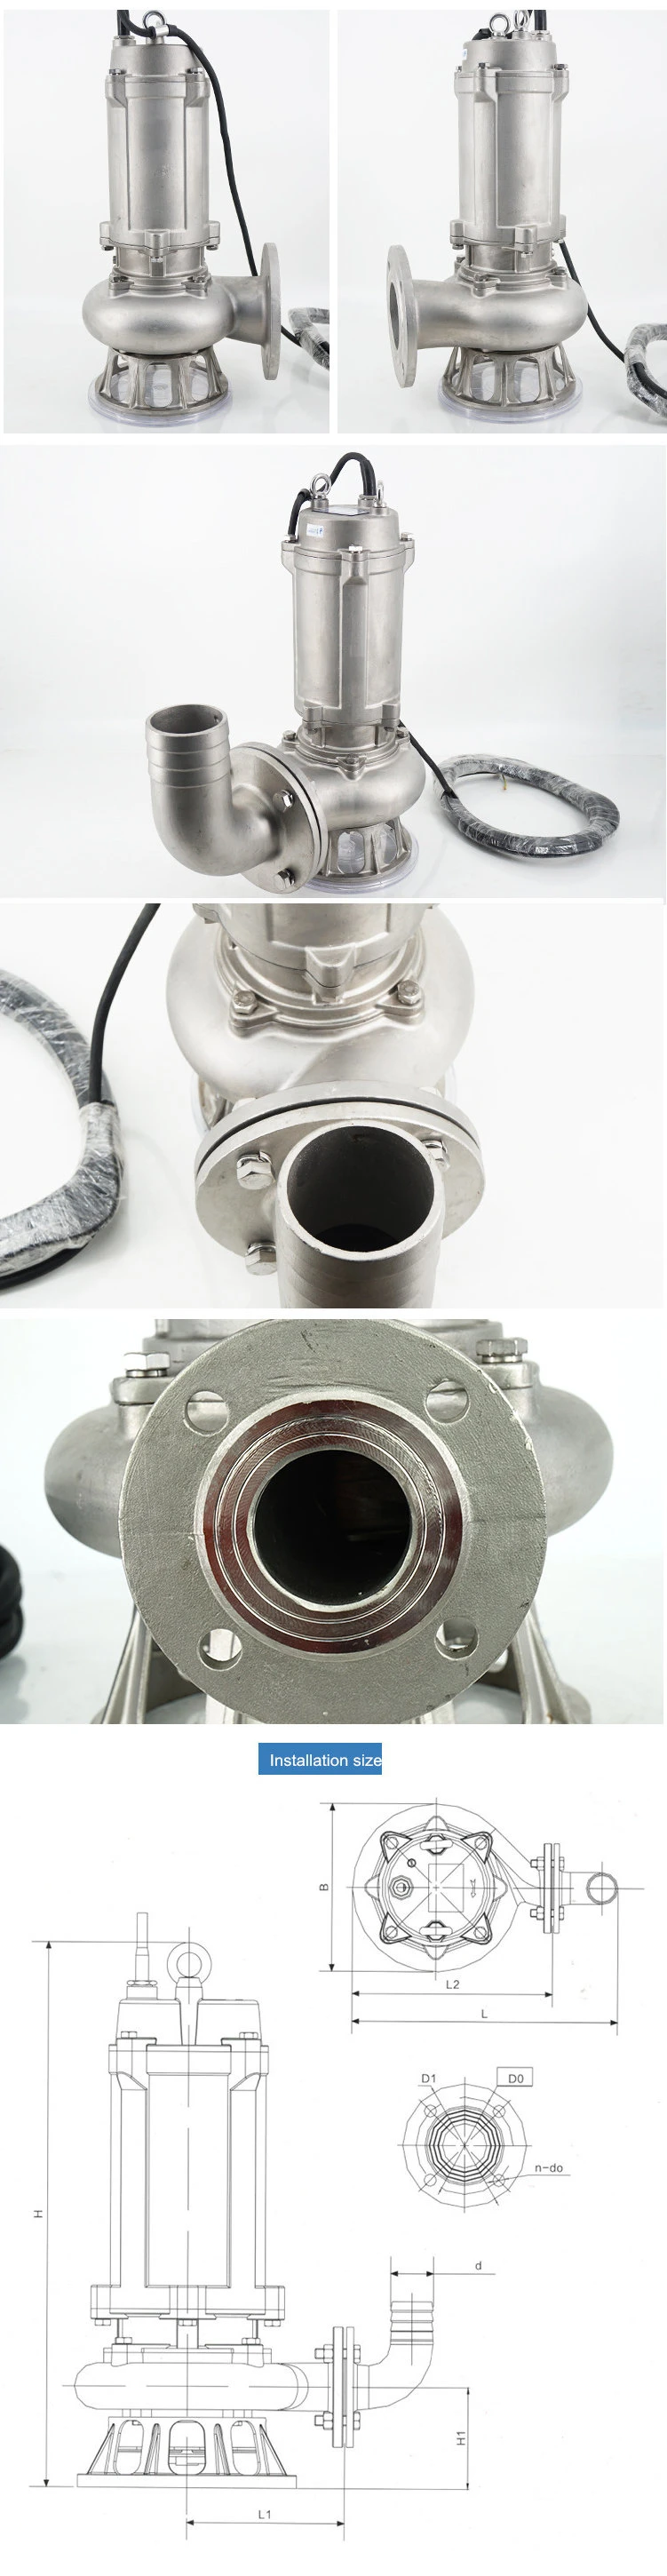 2.2kw 2 Inch Ce BV Stainless Steel Submersible Sewage Pump Dirty Water Pump